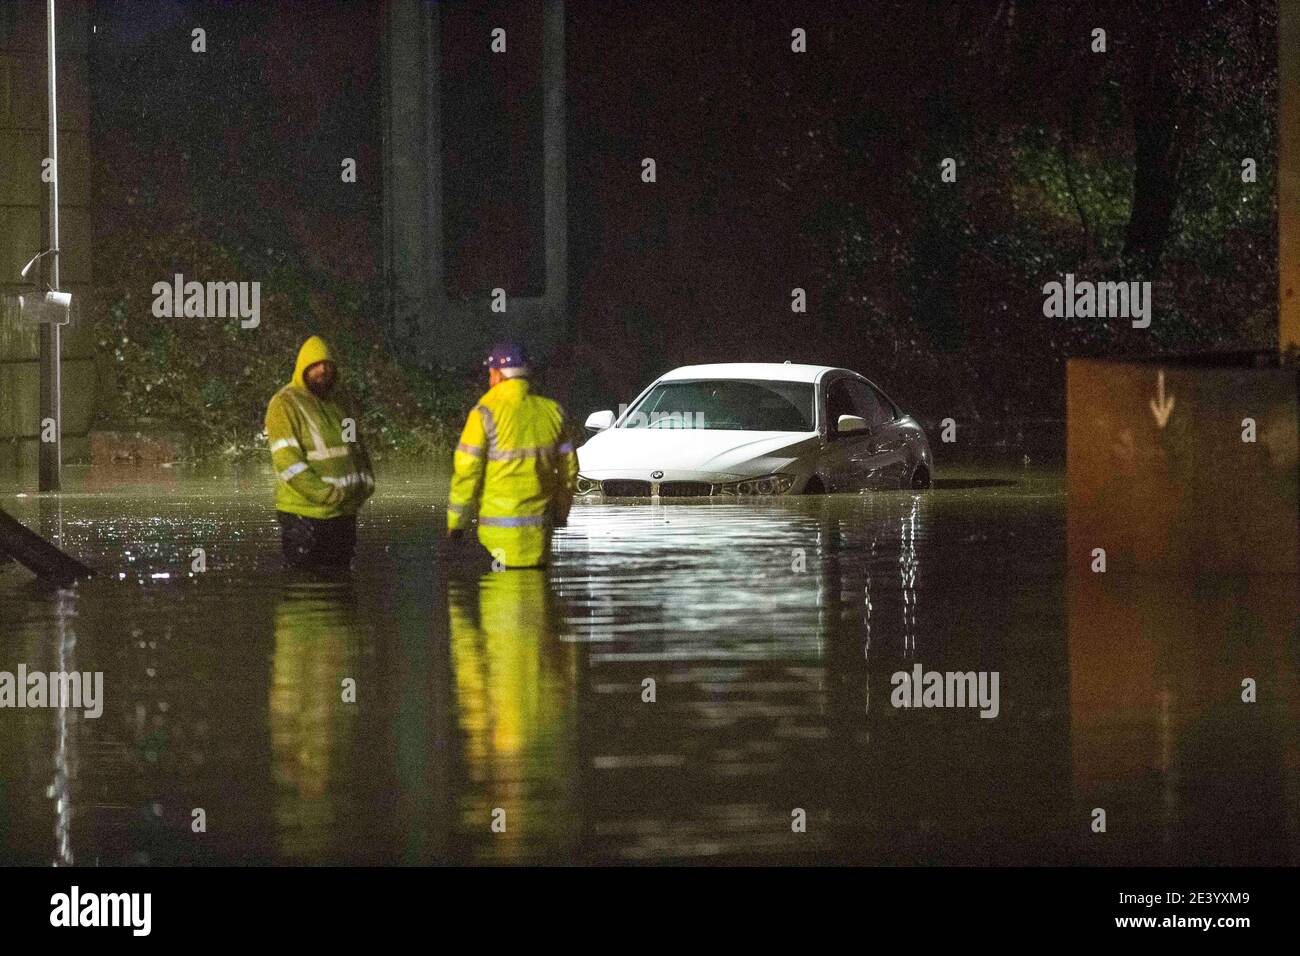 Teesport, Middlesbrough, Teesside, UK. Wednesday 20th January 2021: Pictures show a car stuck in a flood on Tees dock road which is the entrance to Te Stock Photo